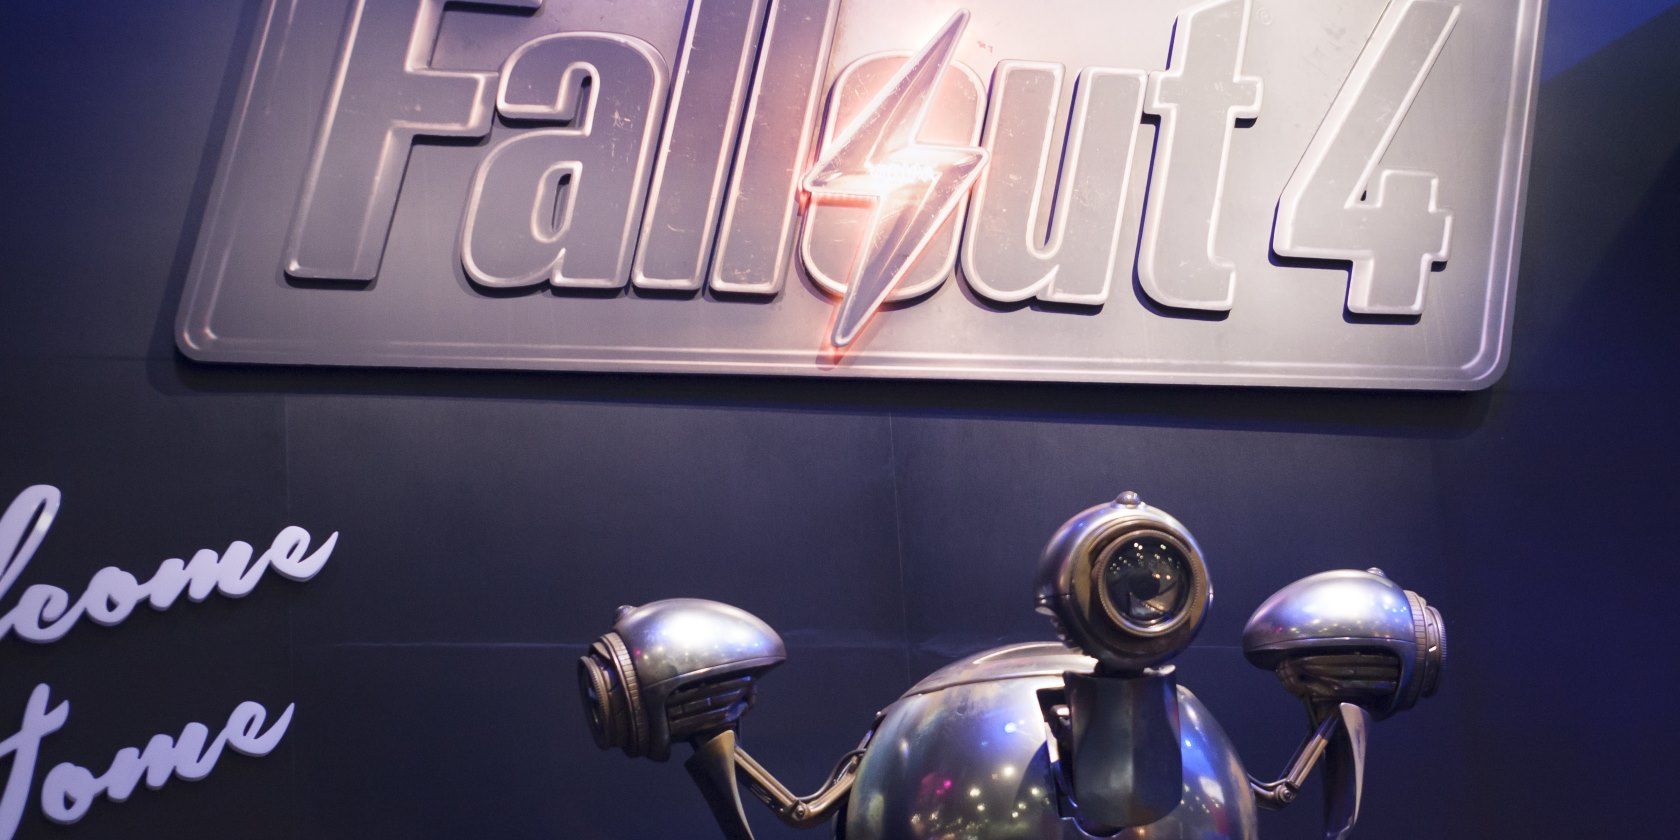 The Fallout 4 stand at E3